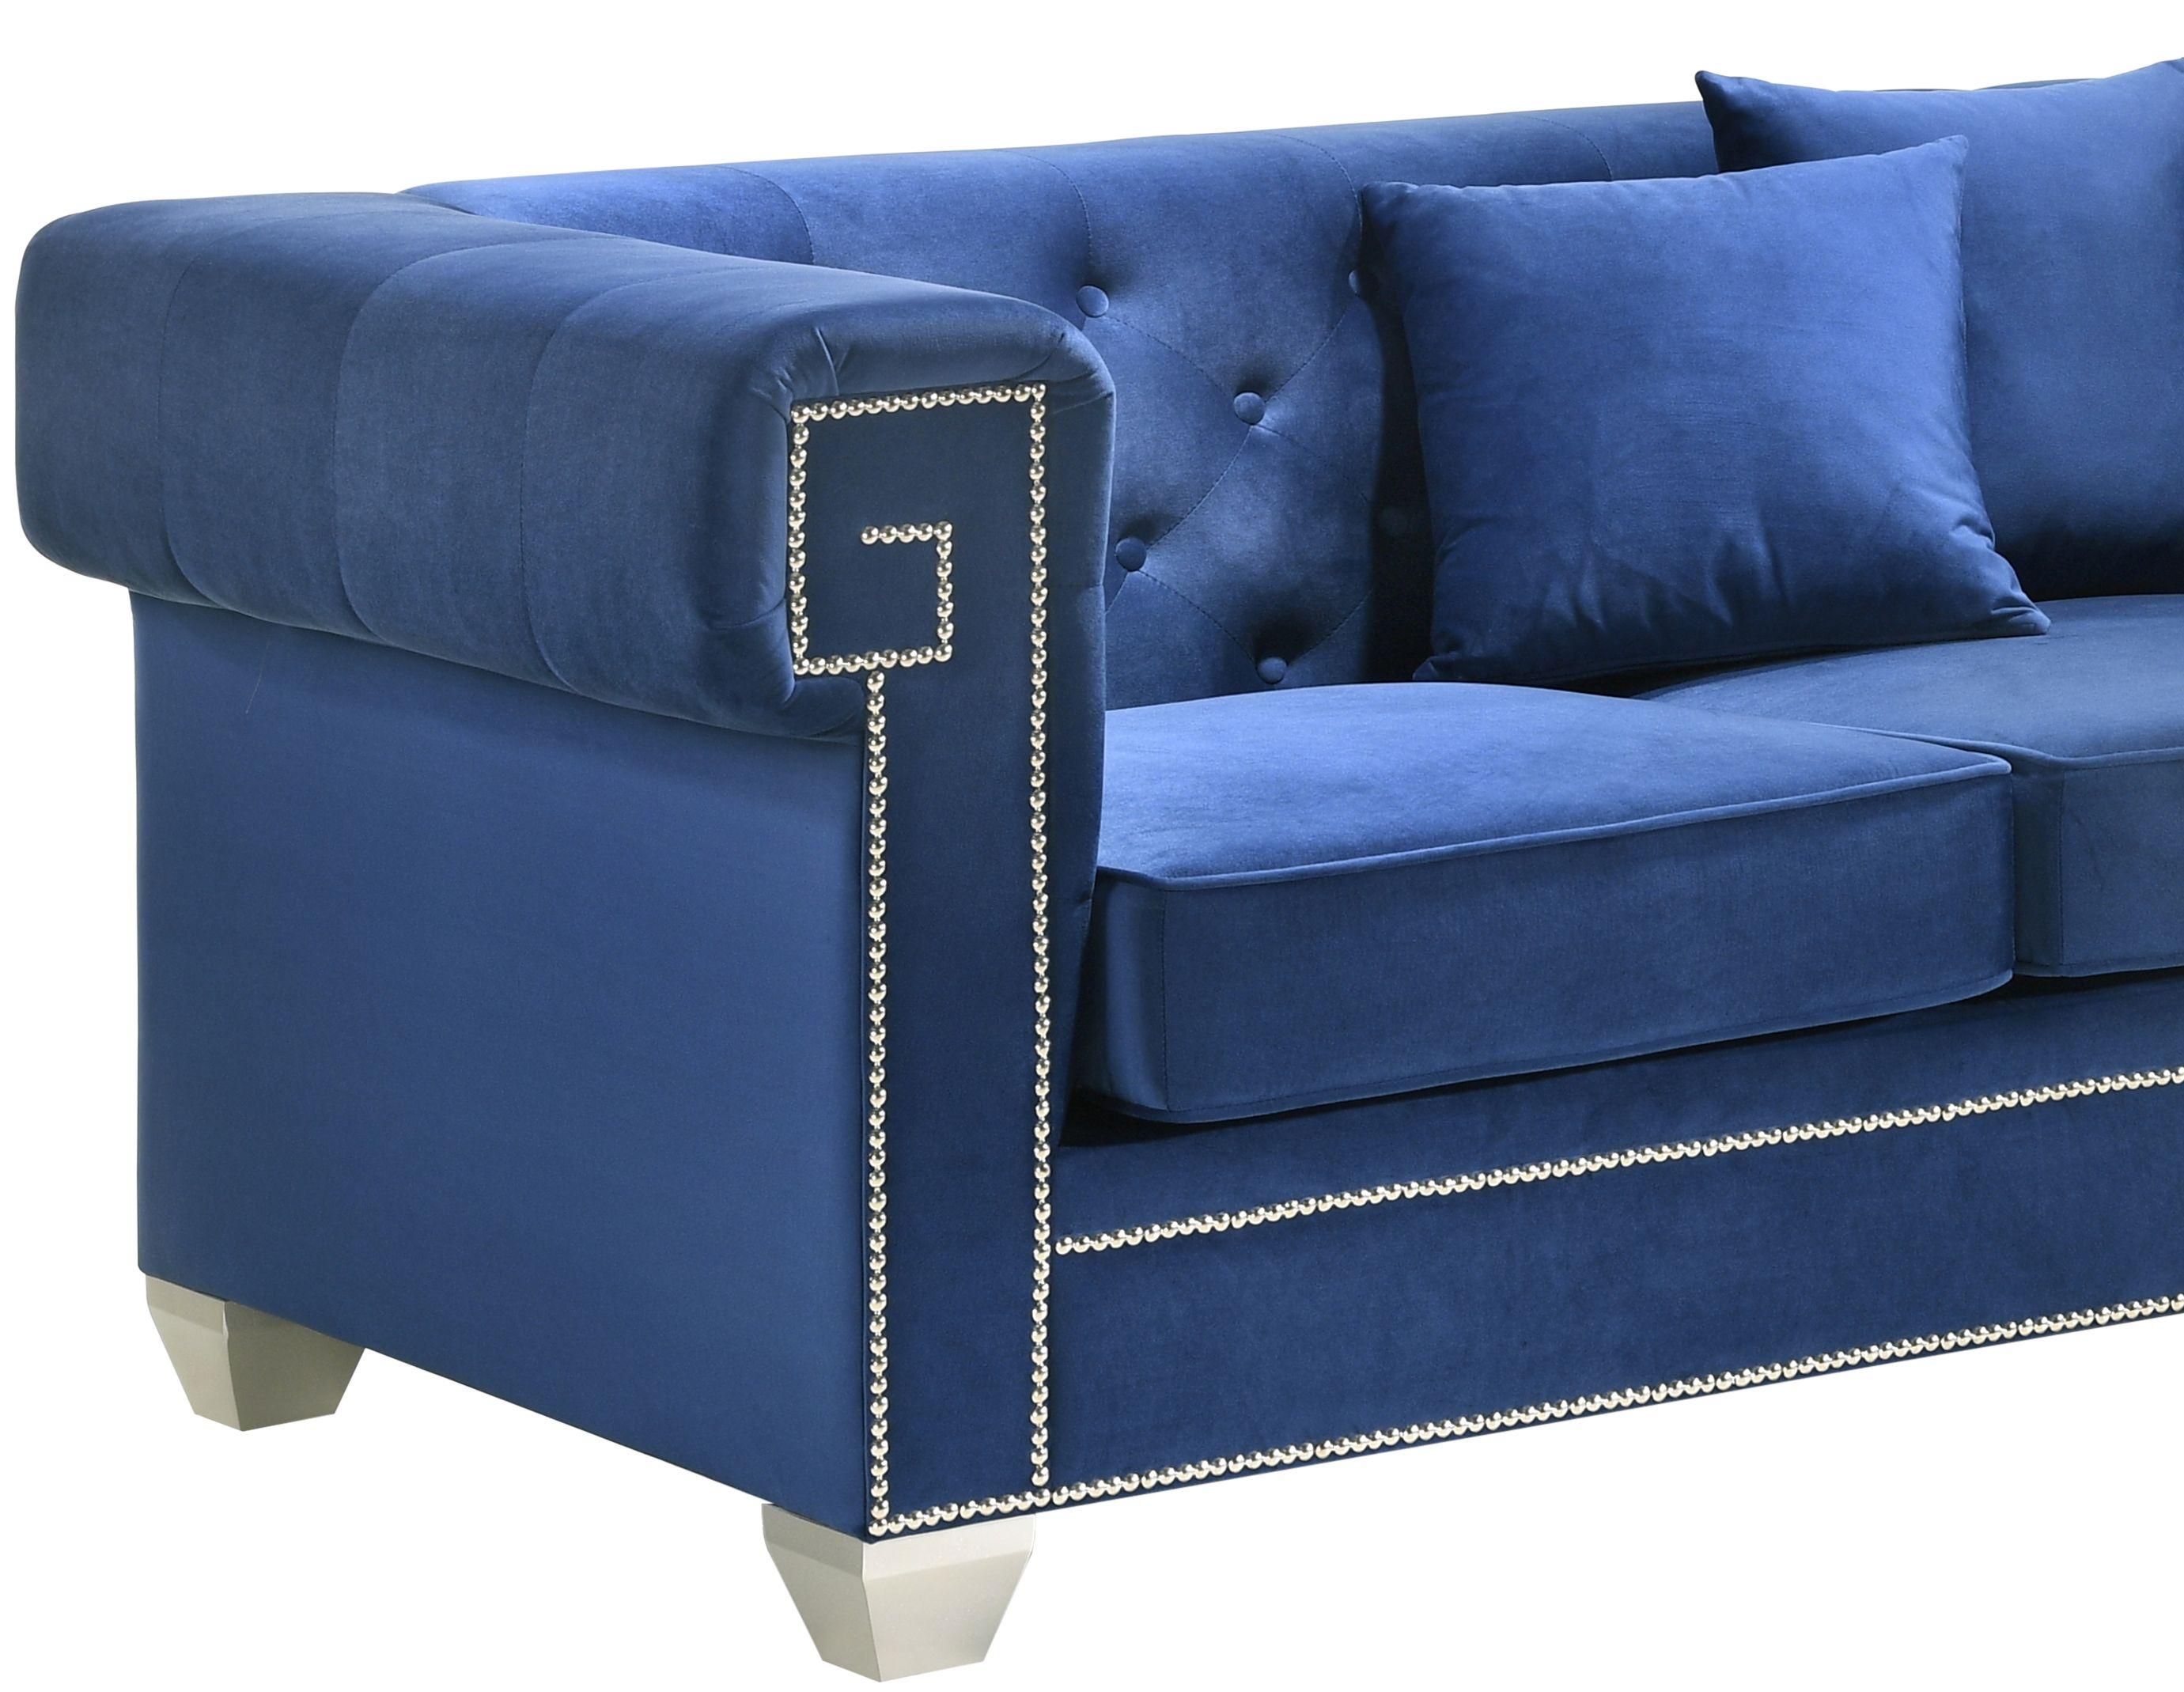 

    
Clover Blue-Set-3 Cosmos Furniture Sofa Loveseat and Chair Set
